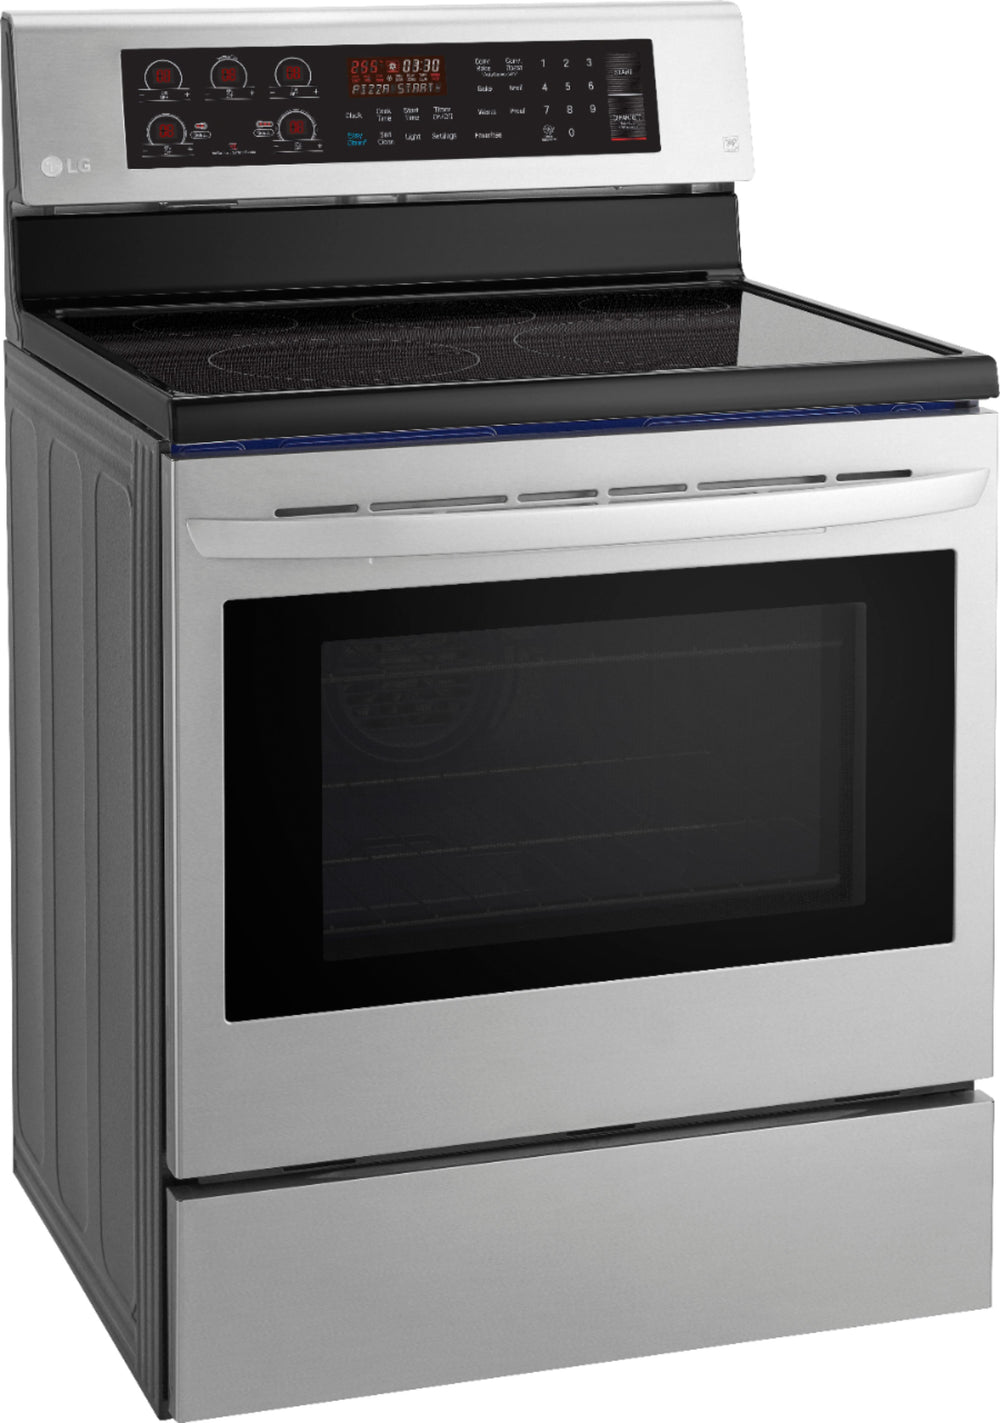 LG - 6.3 Cu. Ft. Freestanding Electric True Convection Range with EasyClean and SmartDiagnosis - Stainless Steel_1